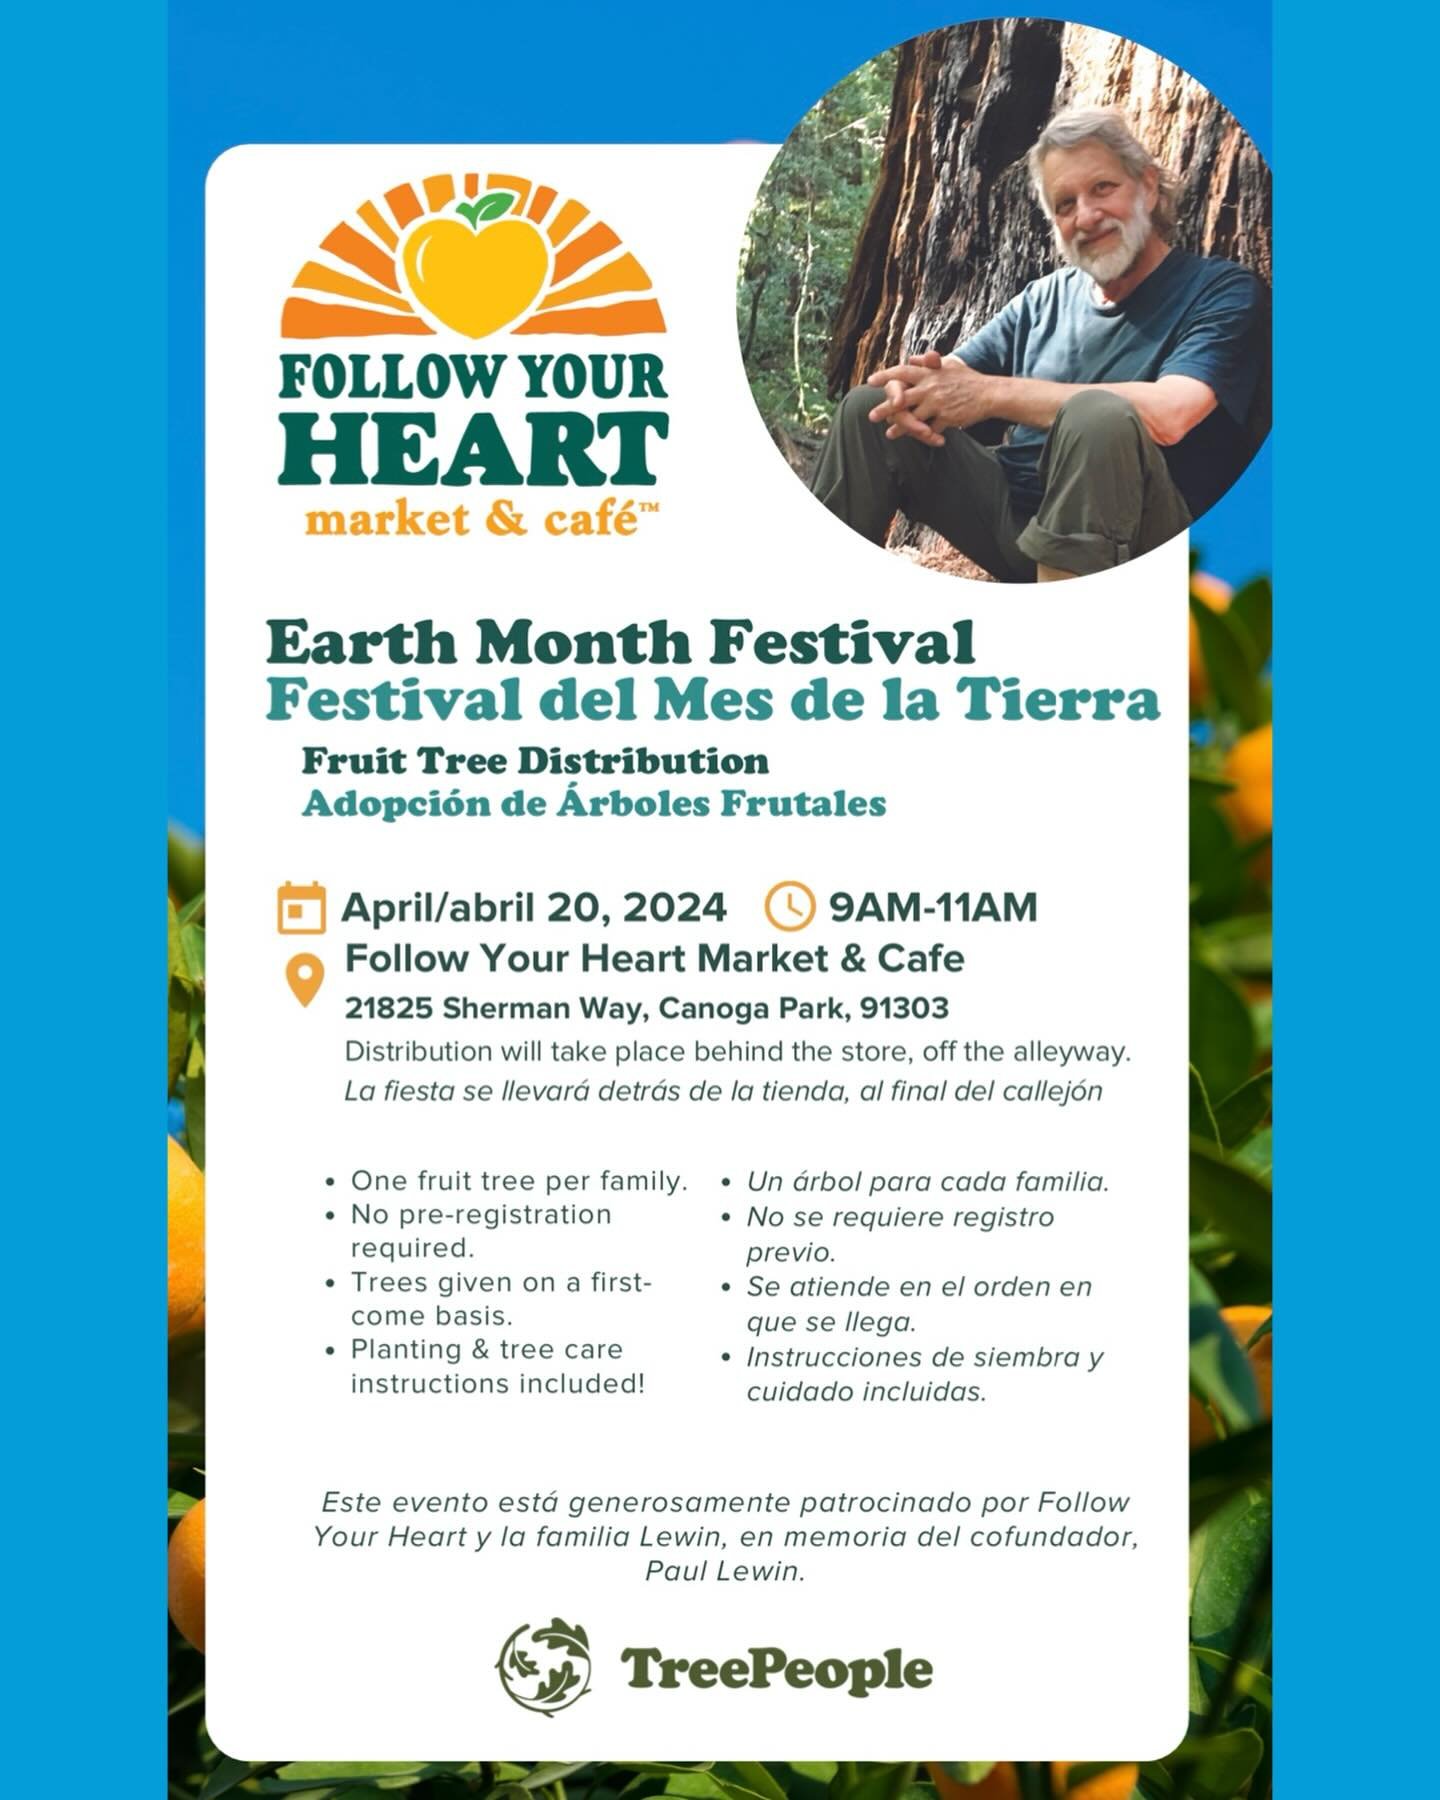 THIS SATURDAY &amp; SUNDAY! Celebrate #EarthDay and #EarthMonth 🌎🍃 with these wonderful FREE events hosted by us 💛 

Saturday, April 20th - fruit tree giveaway in collaboration with @treepeople_org 🌳 In loving memory of our co-founder Paul Lewin 